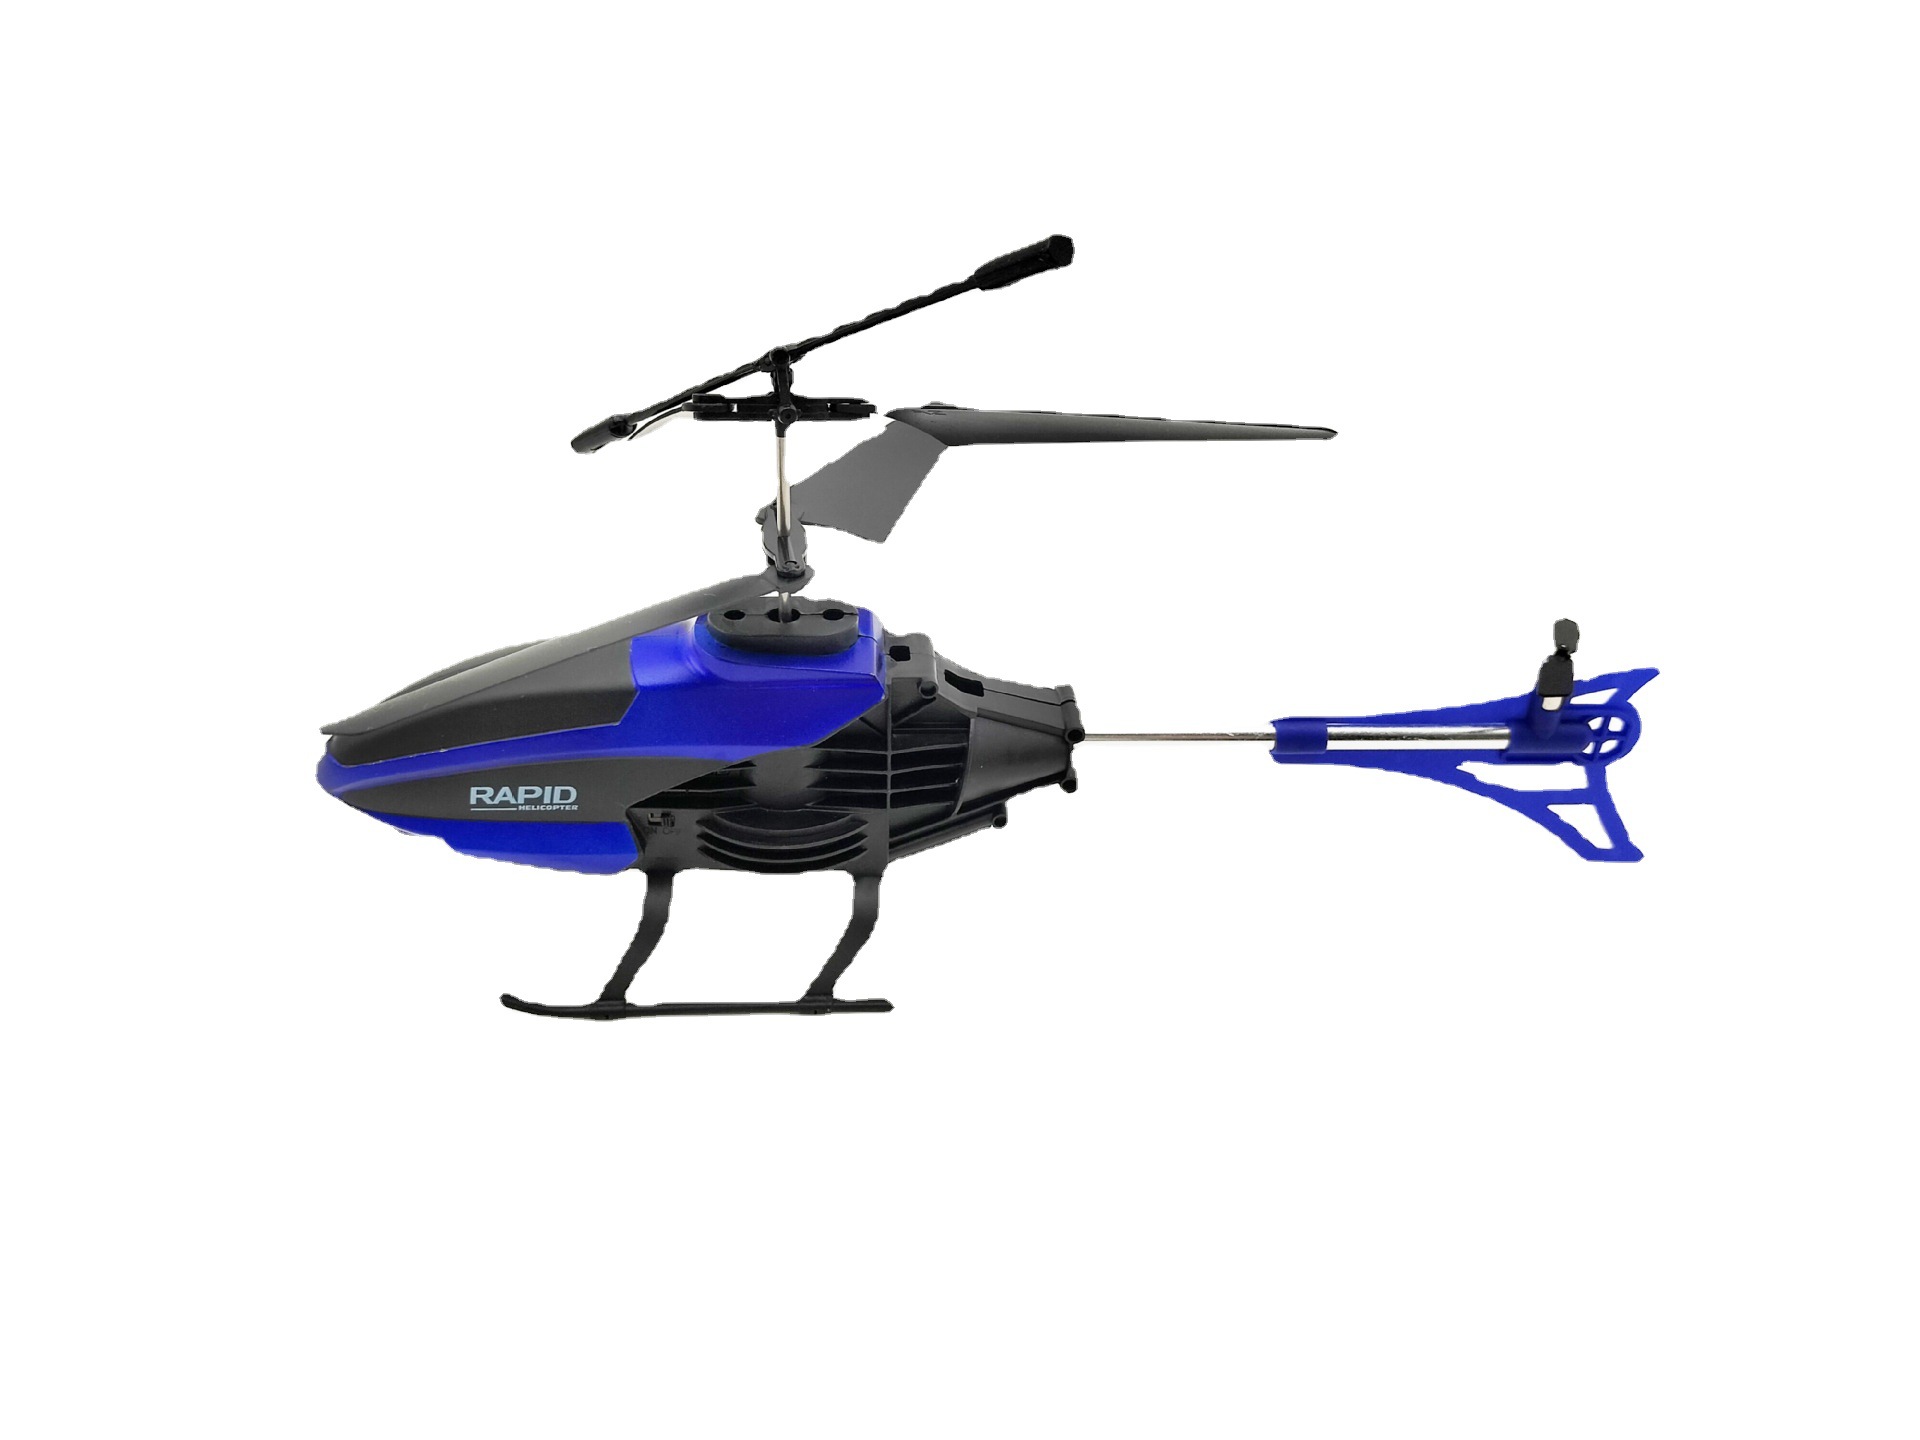 Small Wholesale 2.4G Remote Control Helicopter 3.5